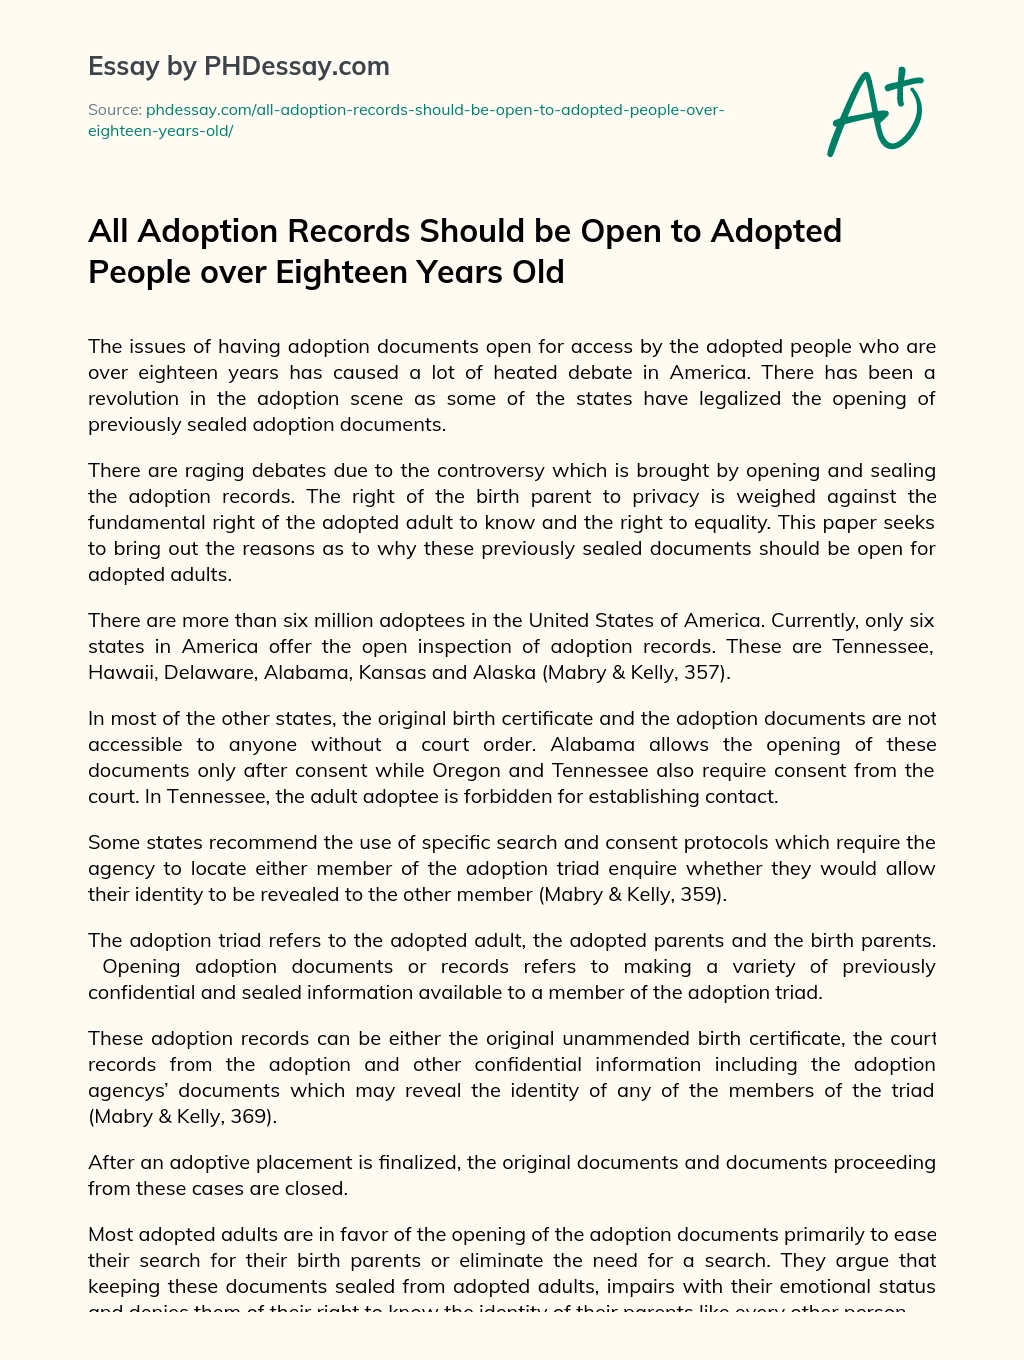 should adoption records be open